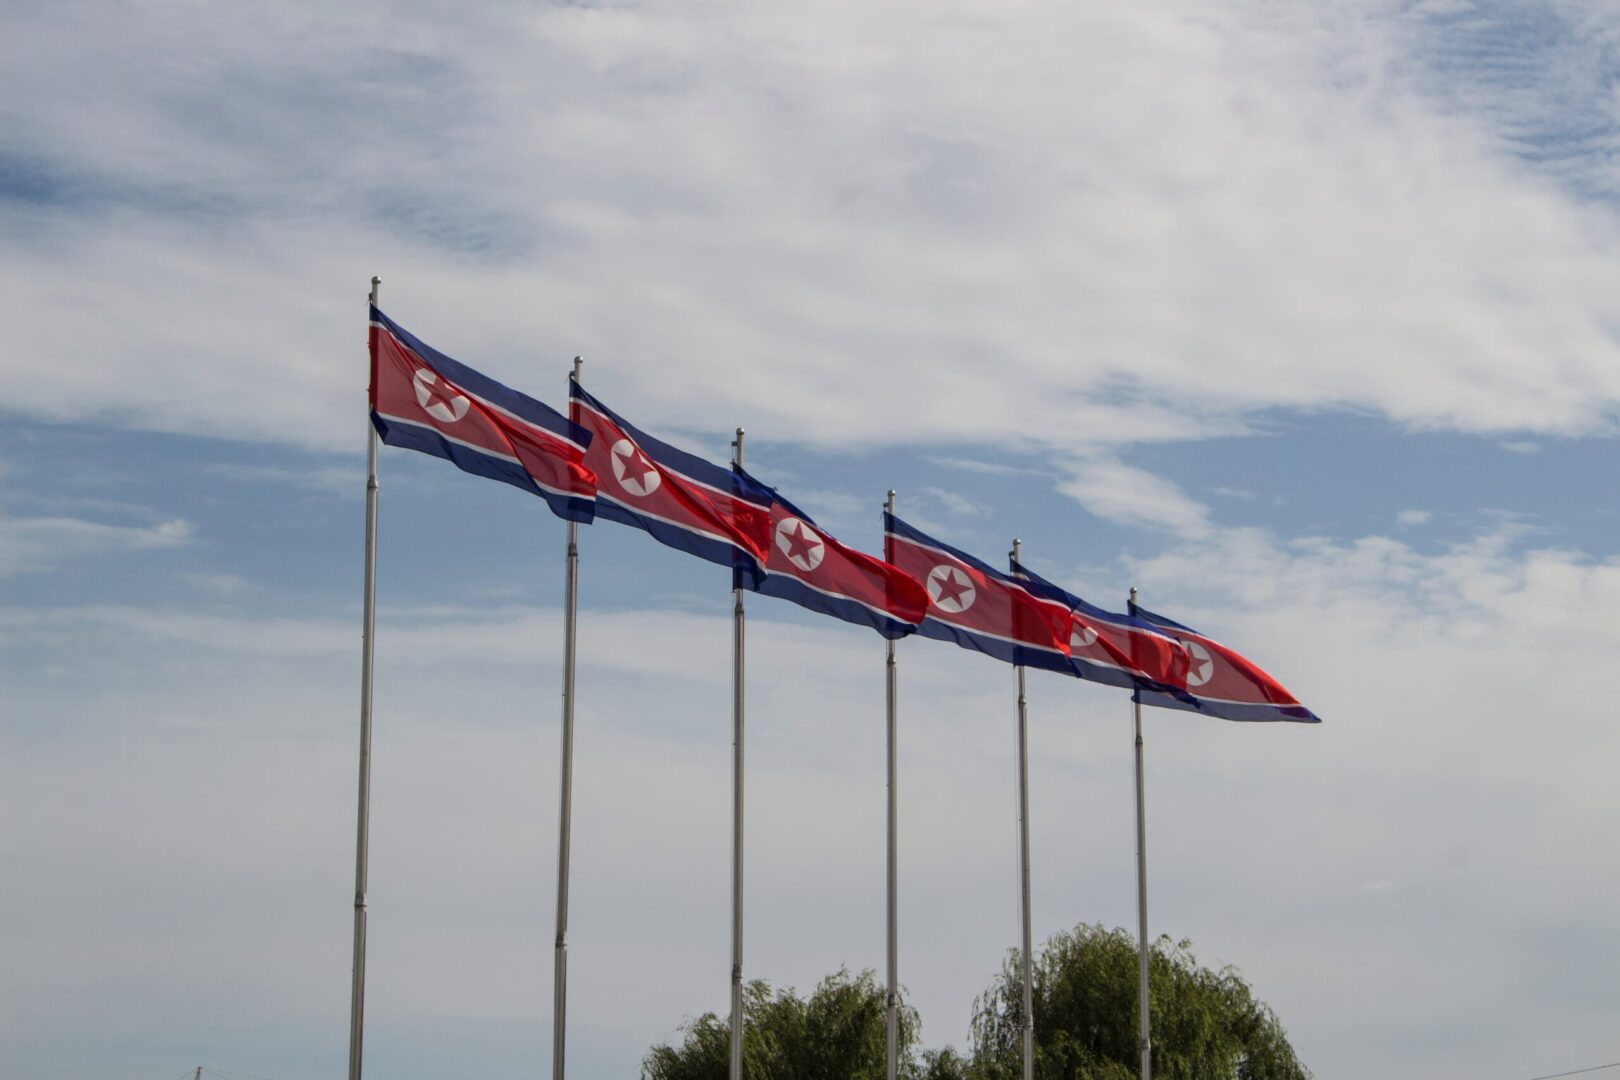 An image of six North Korean flags